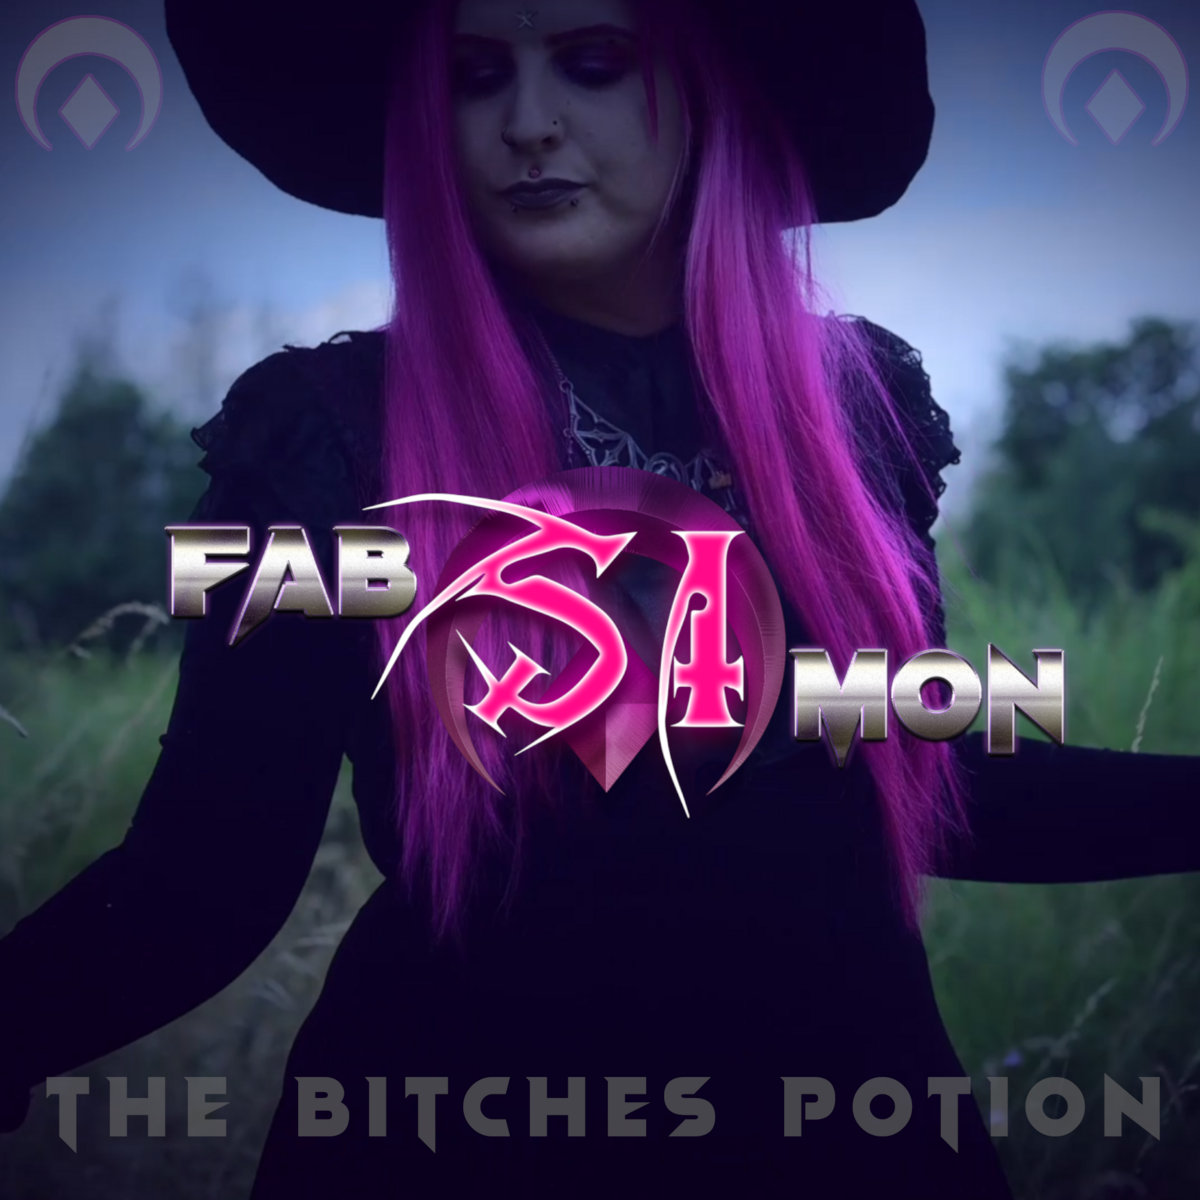 Simon Carter and Fabsi - The Bitches Potion - Simon Carter and Fabsi - The Bitches Potion